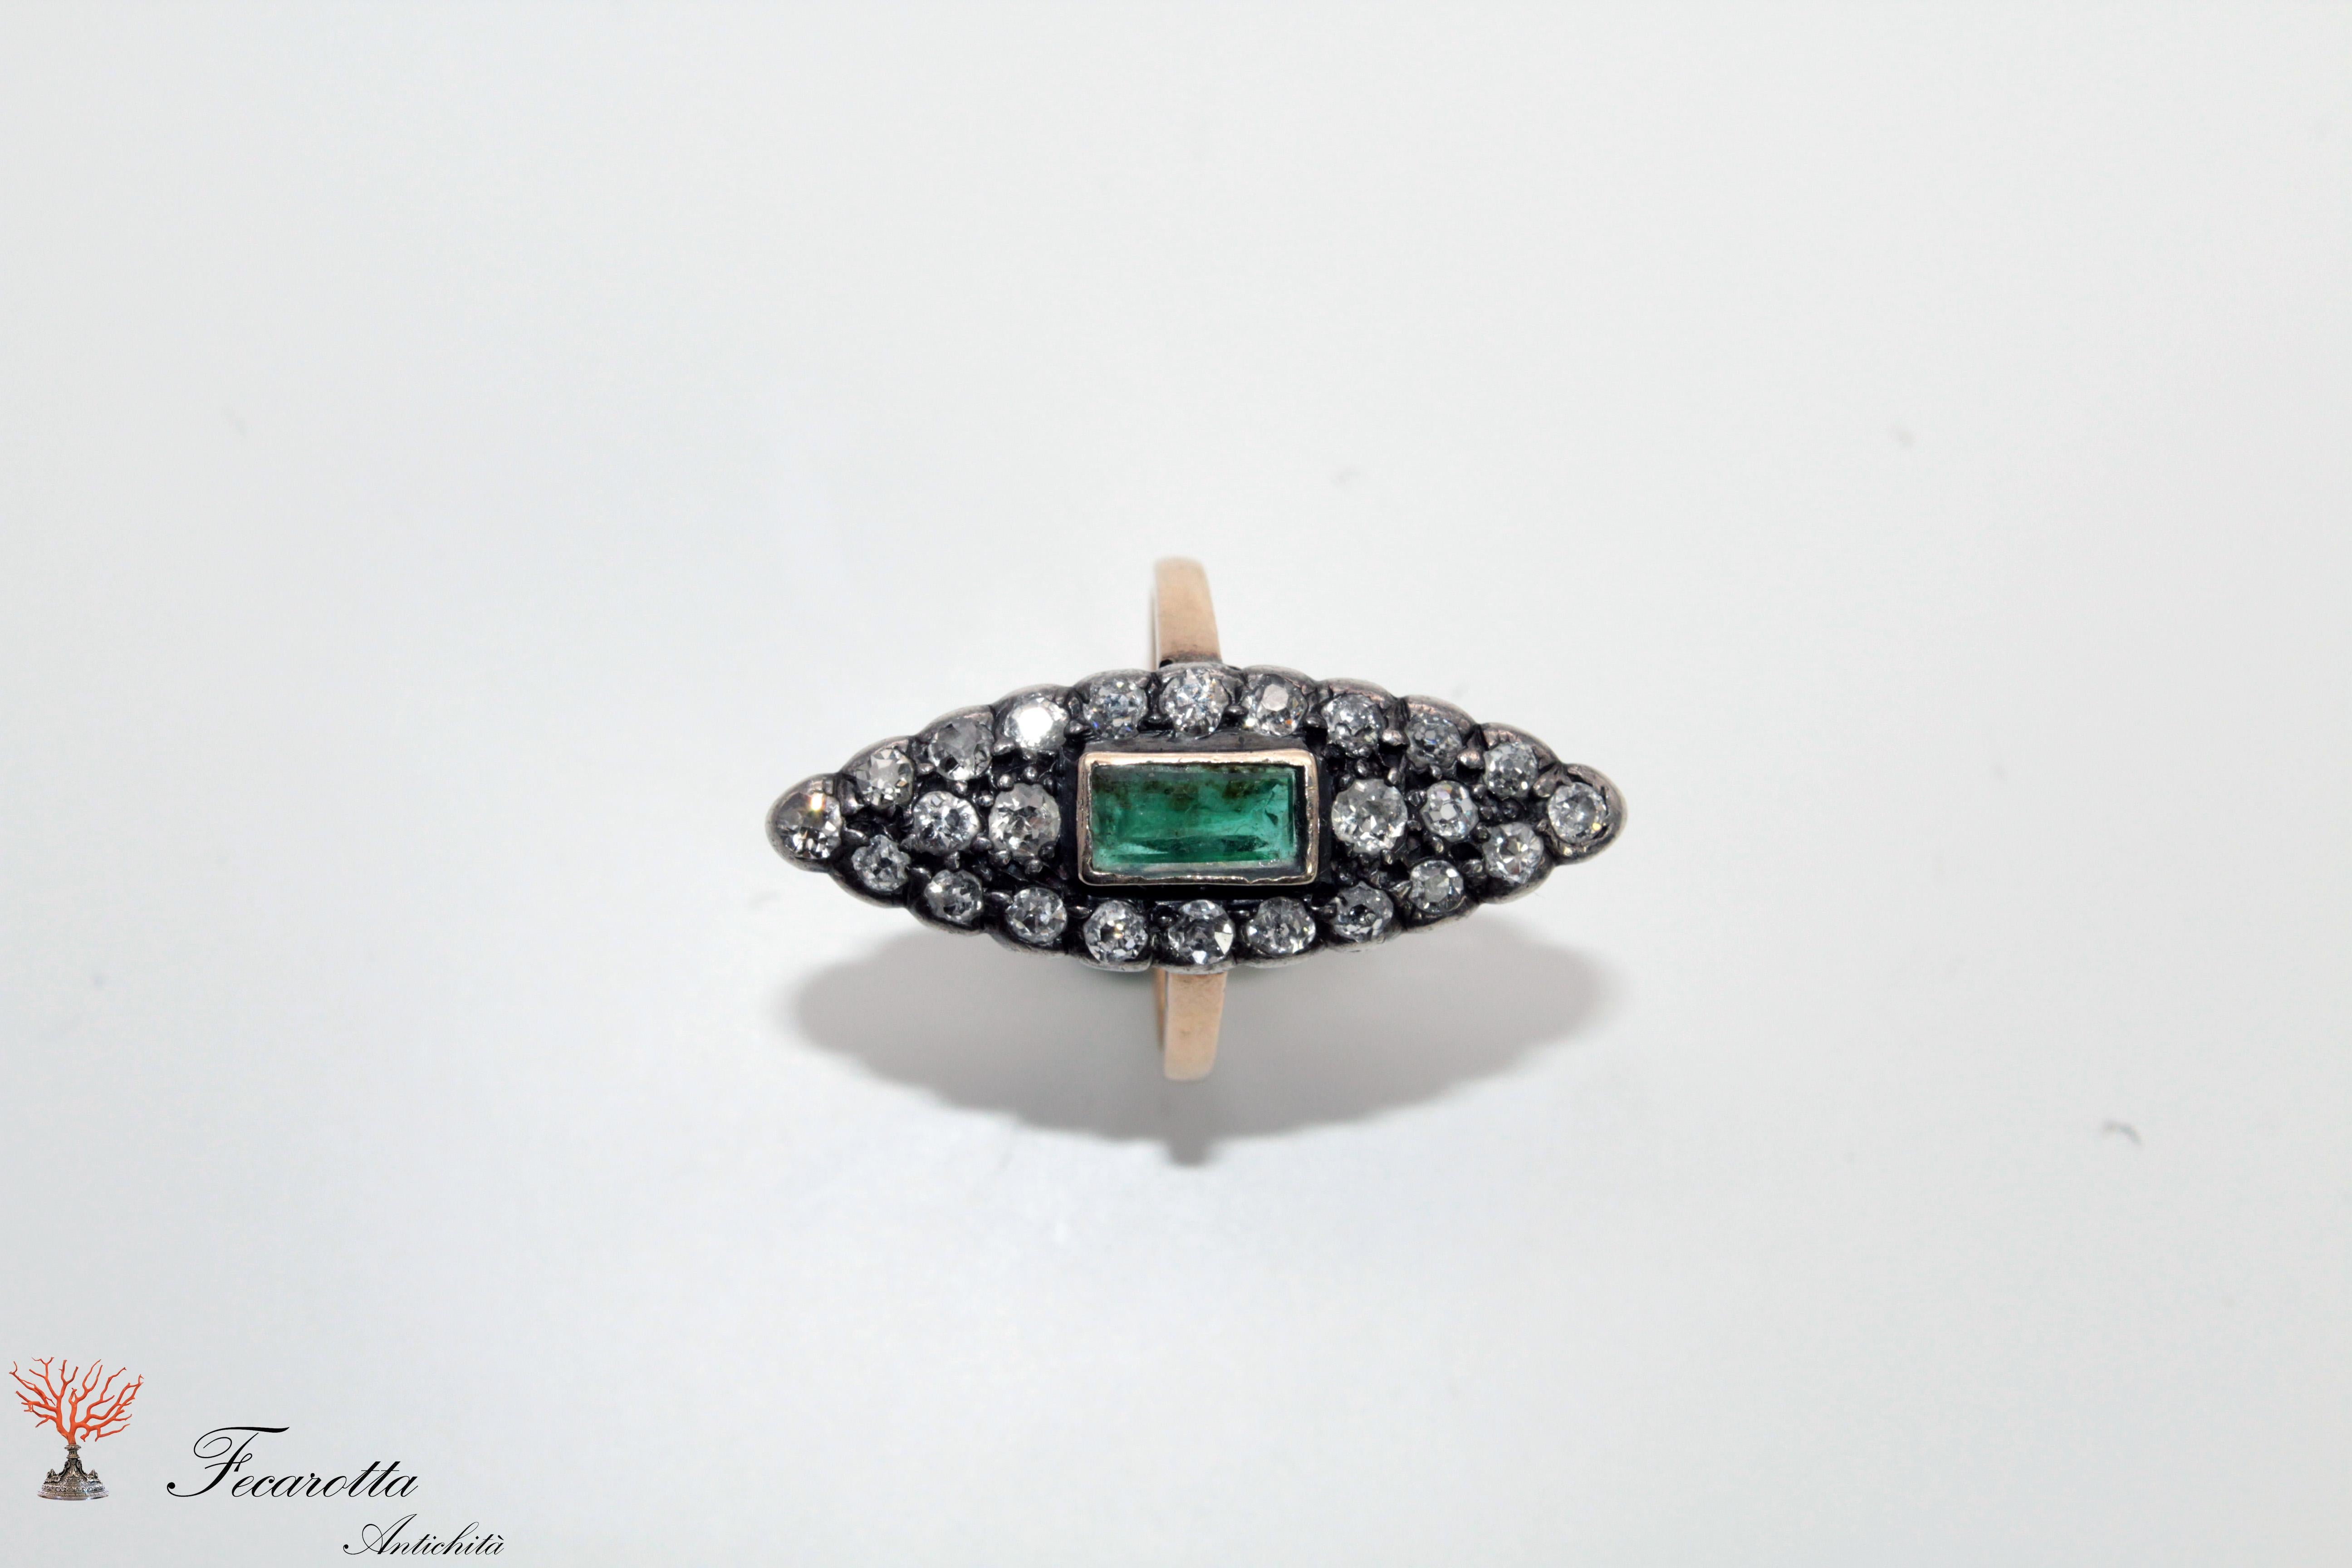 Gold and silver diamonds and central emerald ring handmade in Sicily
XIX century.